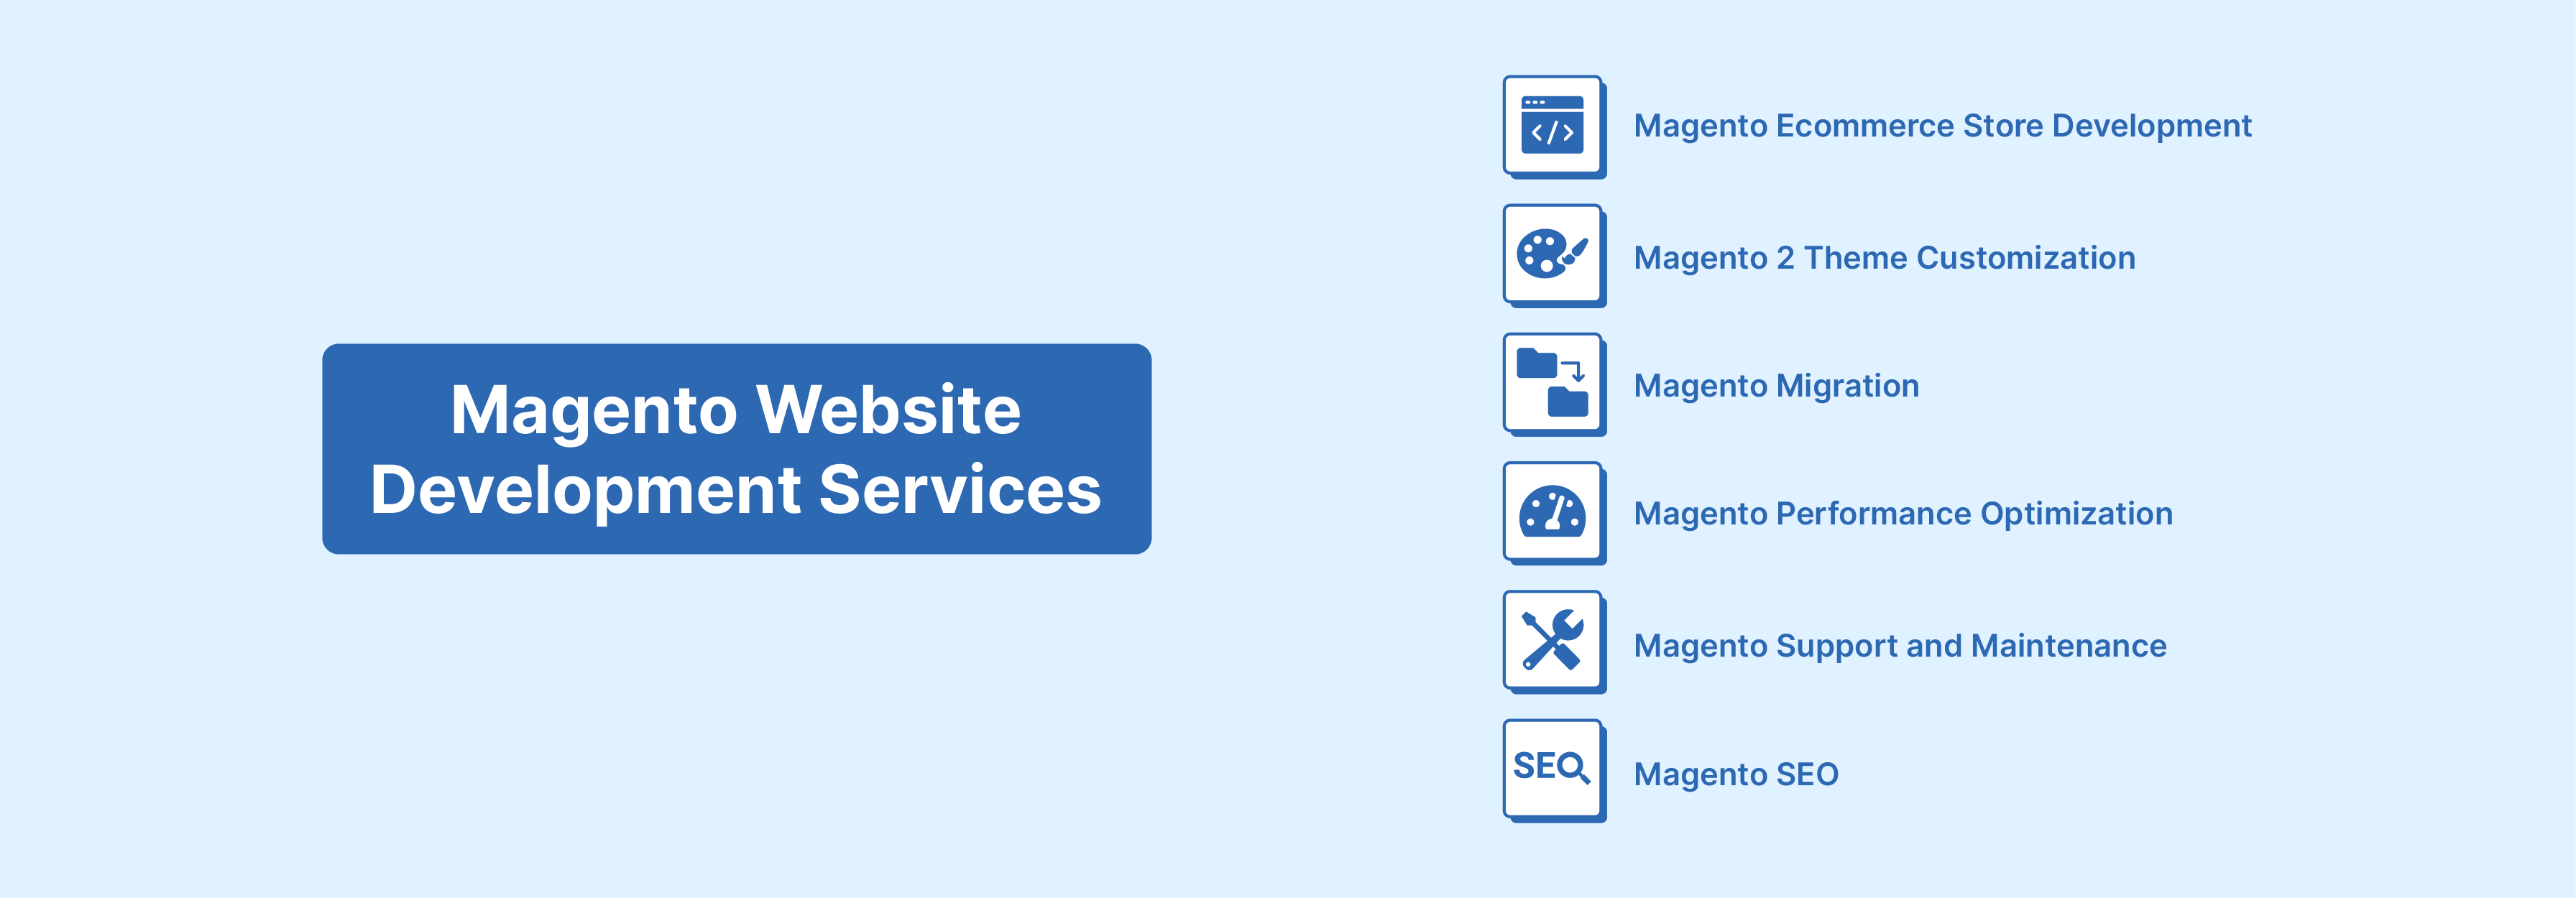 Array of services offered in Magento website development for e-commerce growth